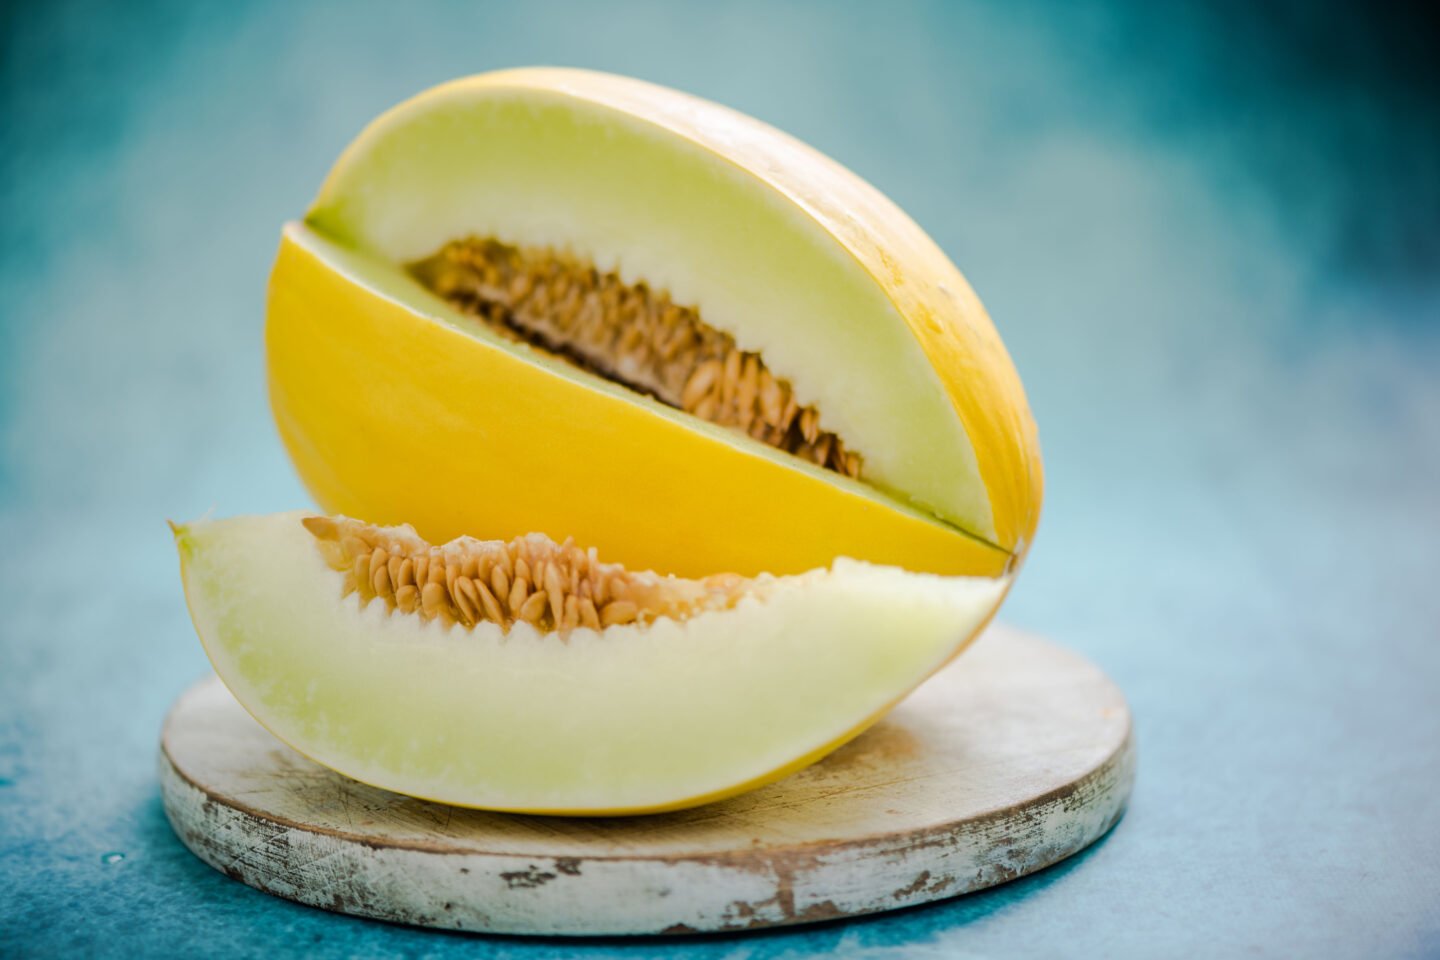 honeydew melon whole and sliced